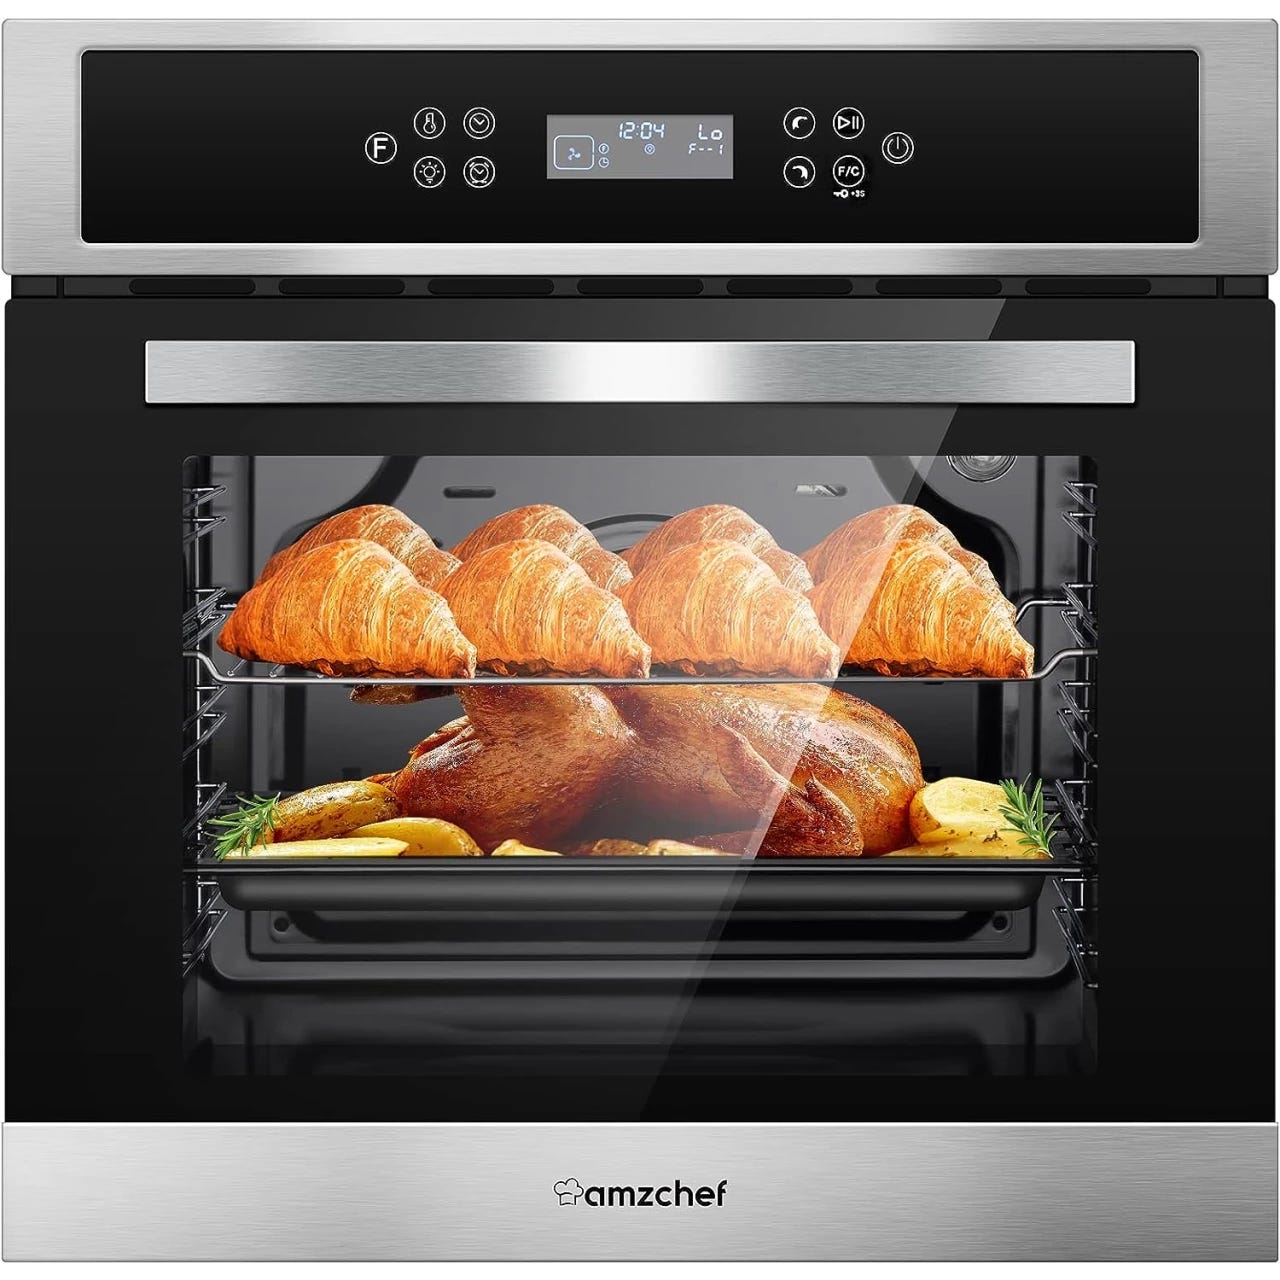 Choosing the Best 24-Inch Wall Oven: Our Top 5 Picks Reviewed, by Nora